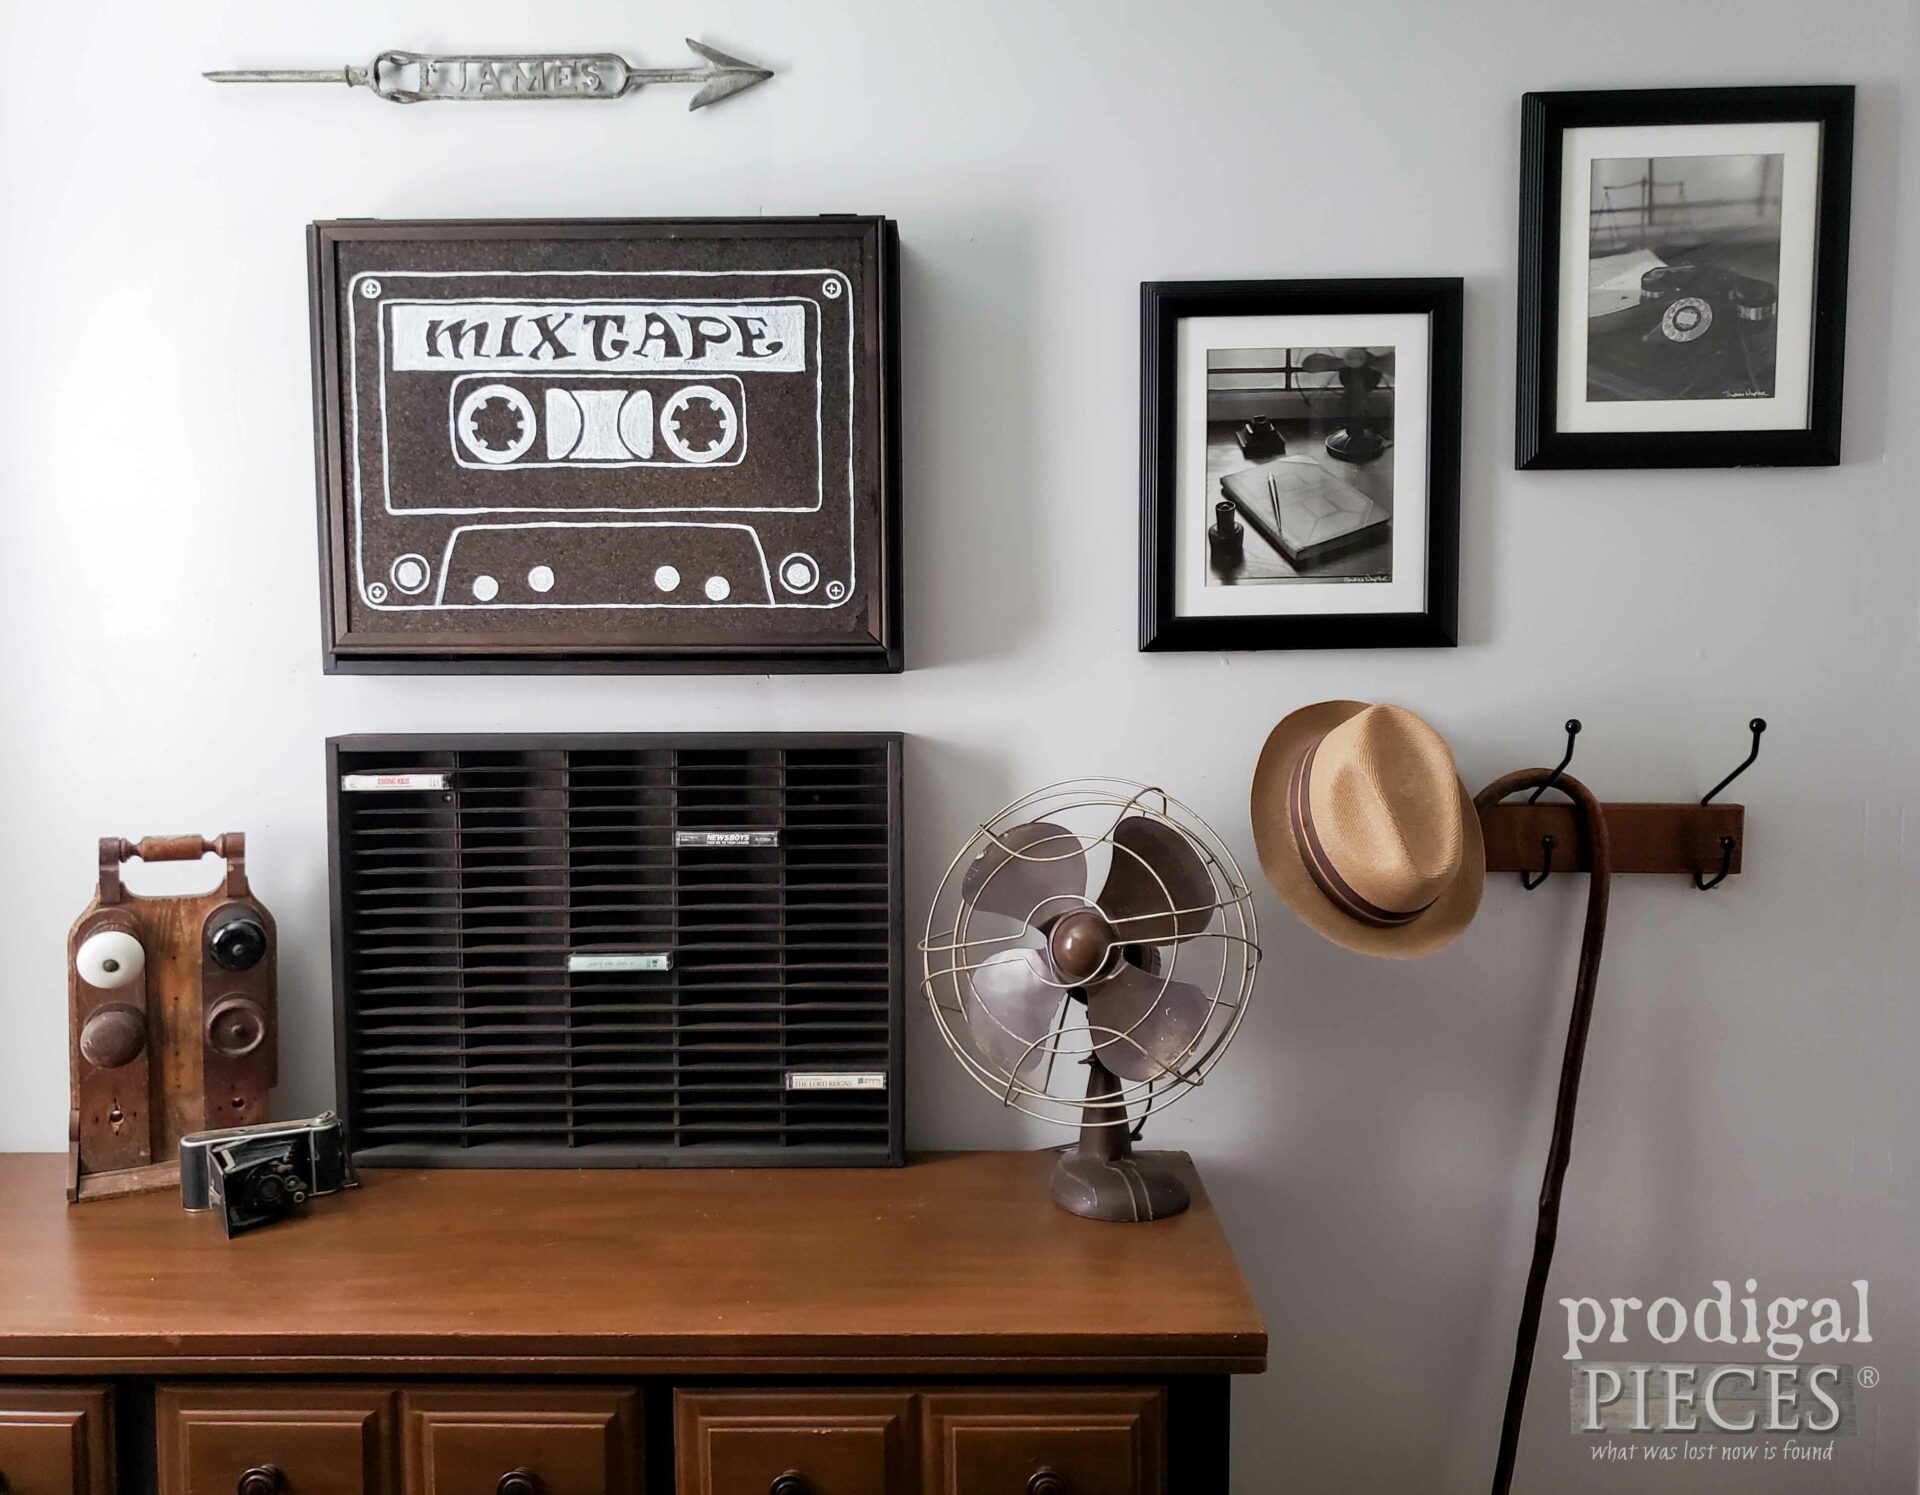 DIY Vintage Cassette Tape Holder Update & Makeover by Larissa of Prodigal Pieces | prodigalpieces.com #prodigalpieces #cassettetape